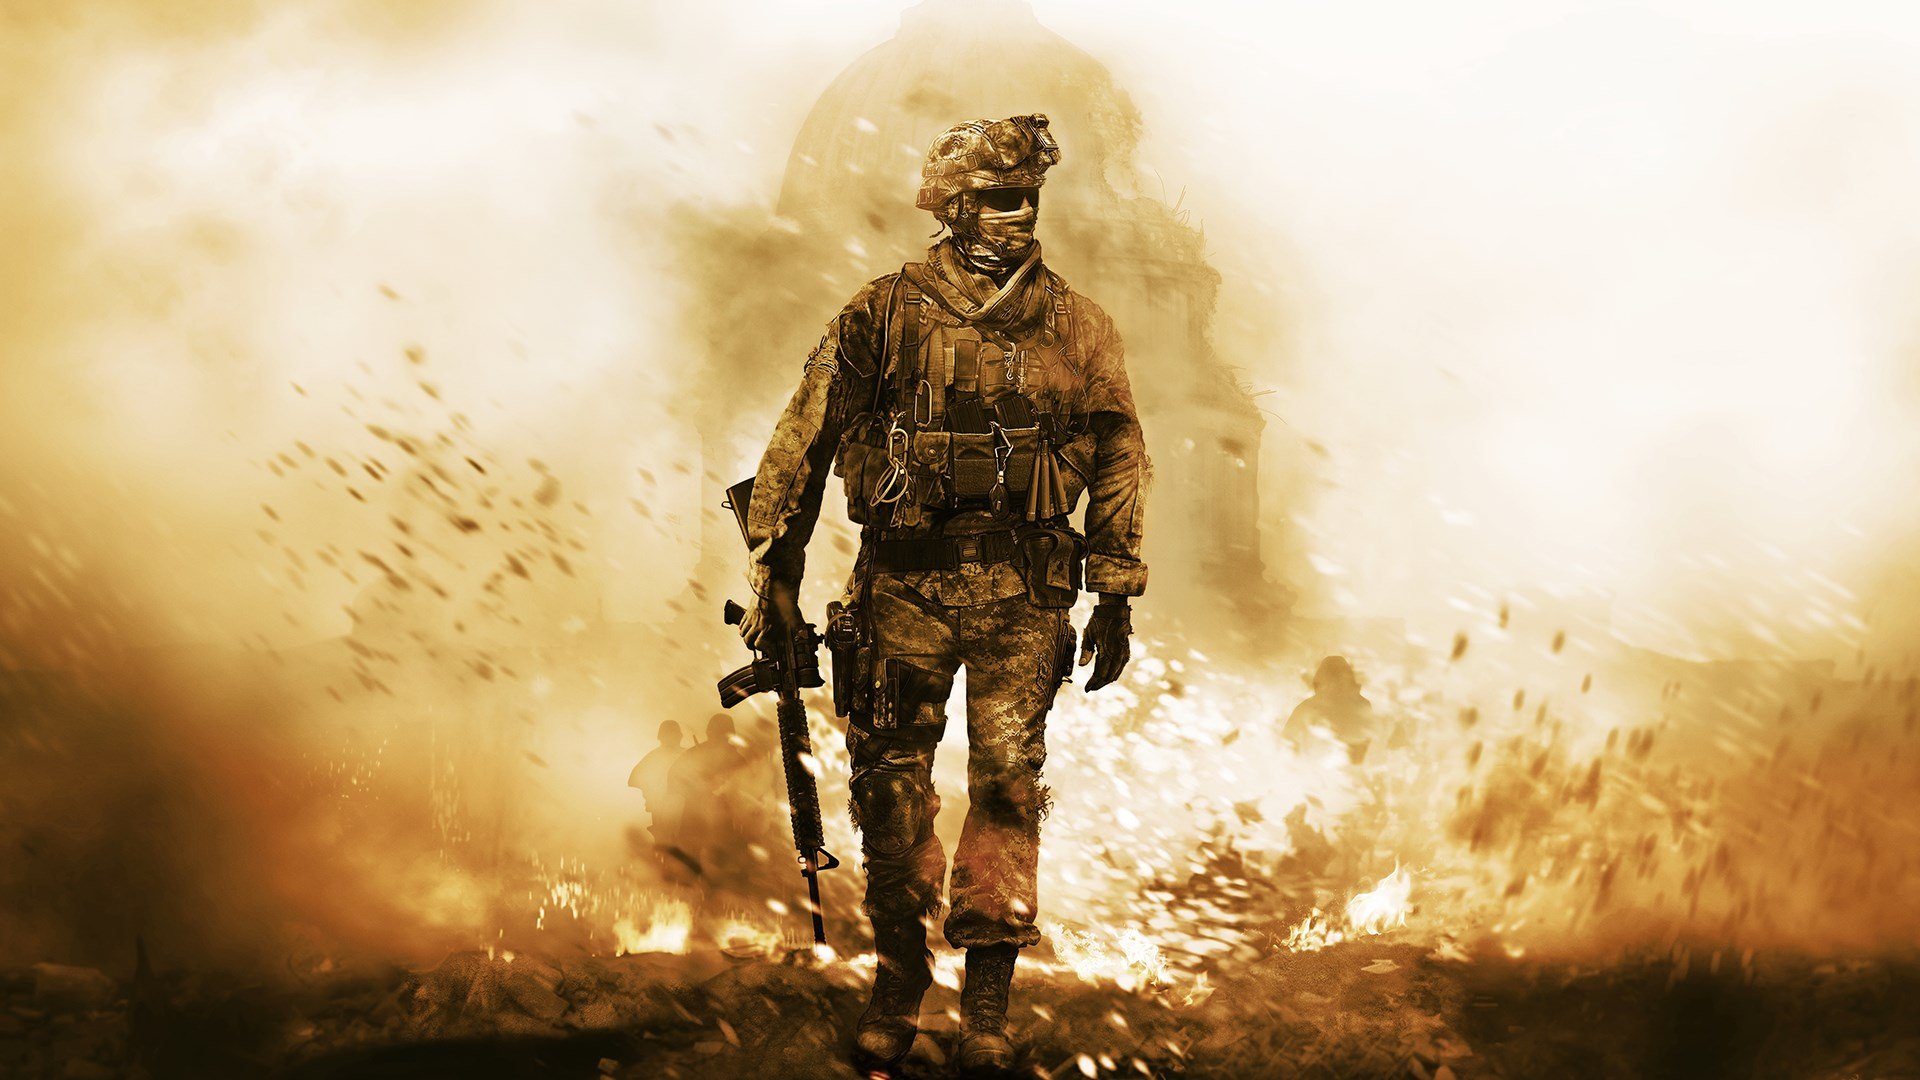 call of duty modern warfare 2 campaign remastered download